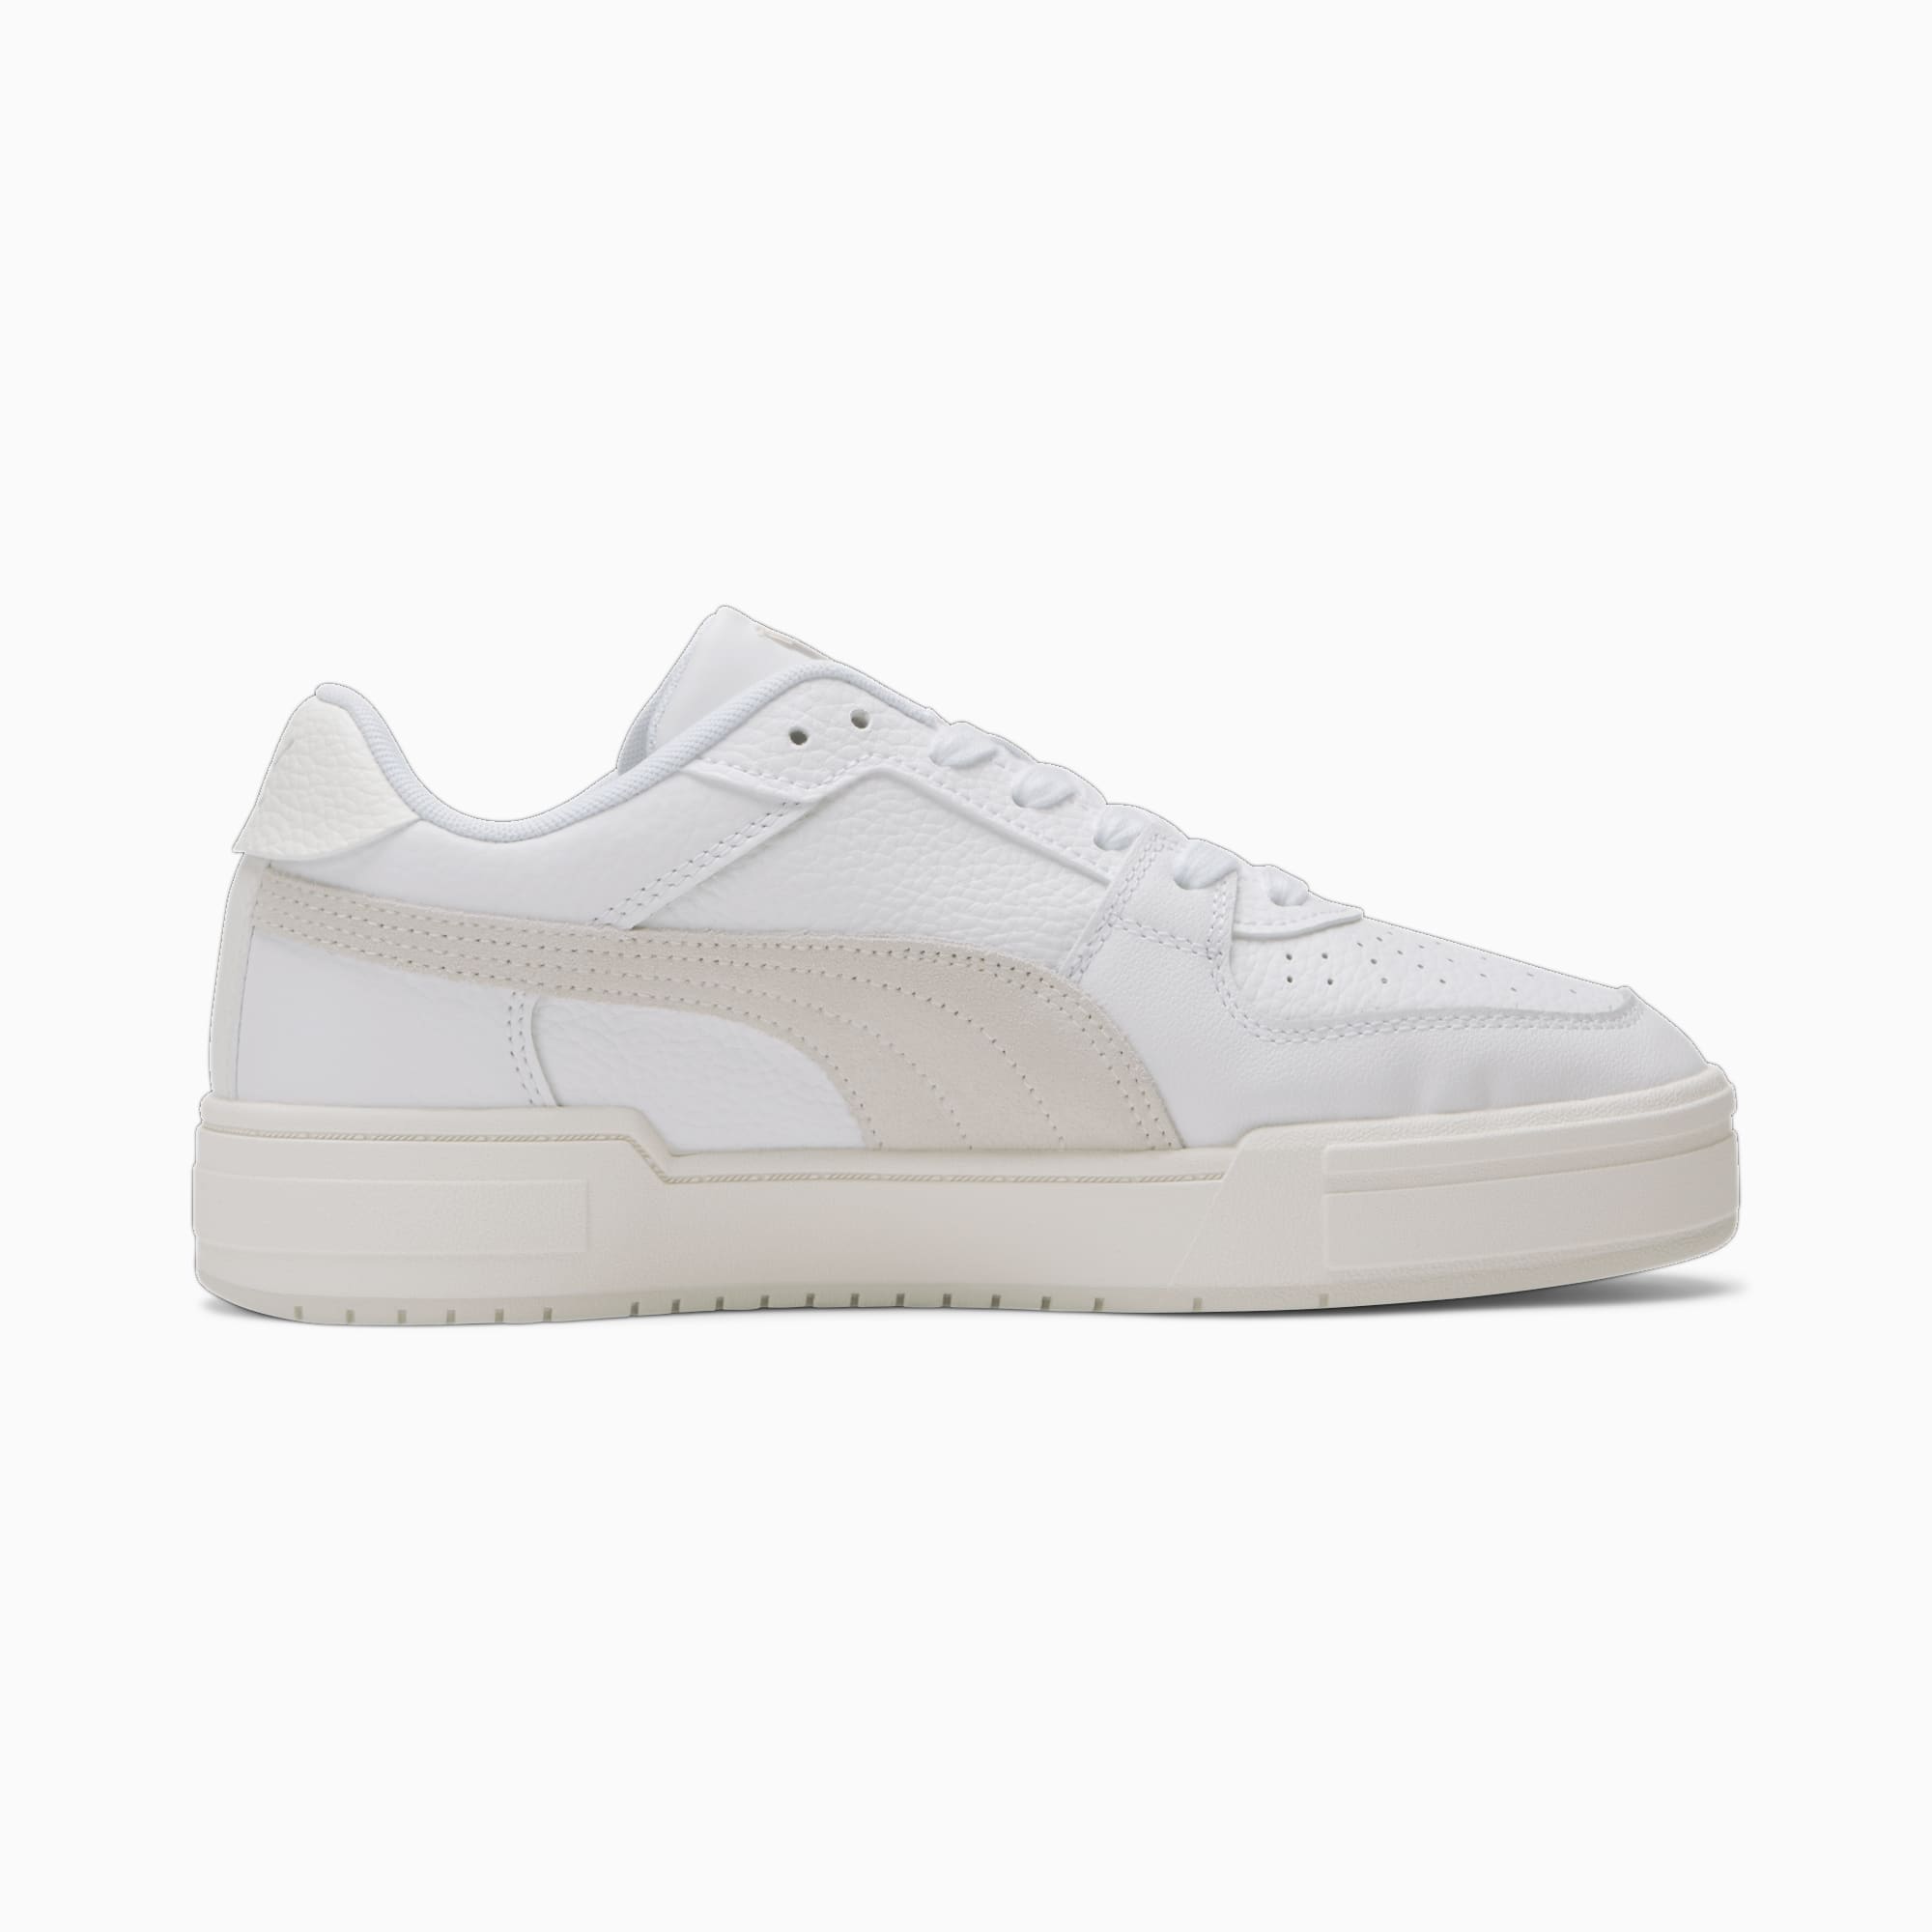 PUMA Chaussure Sneakers CA Pro OW, Blanc/Gris